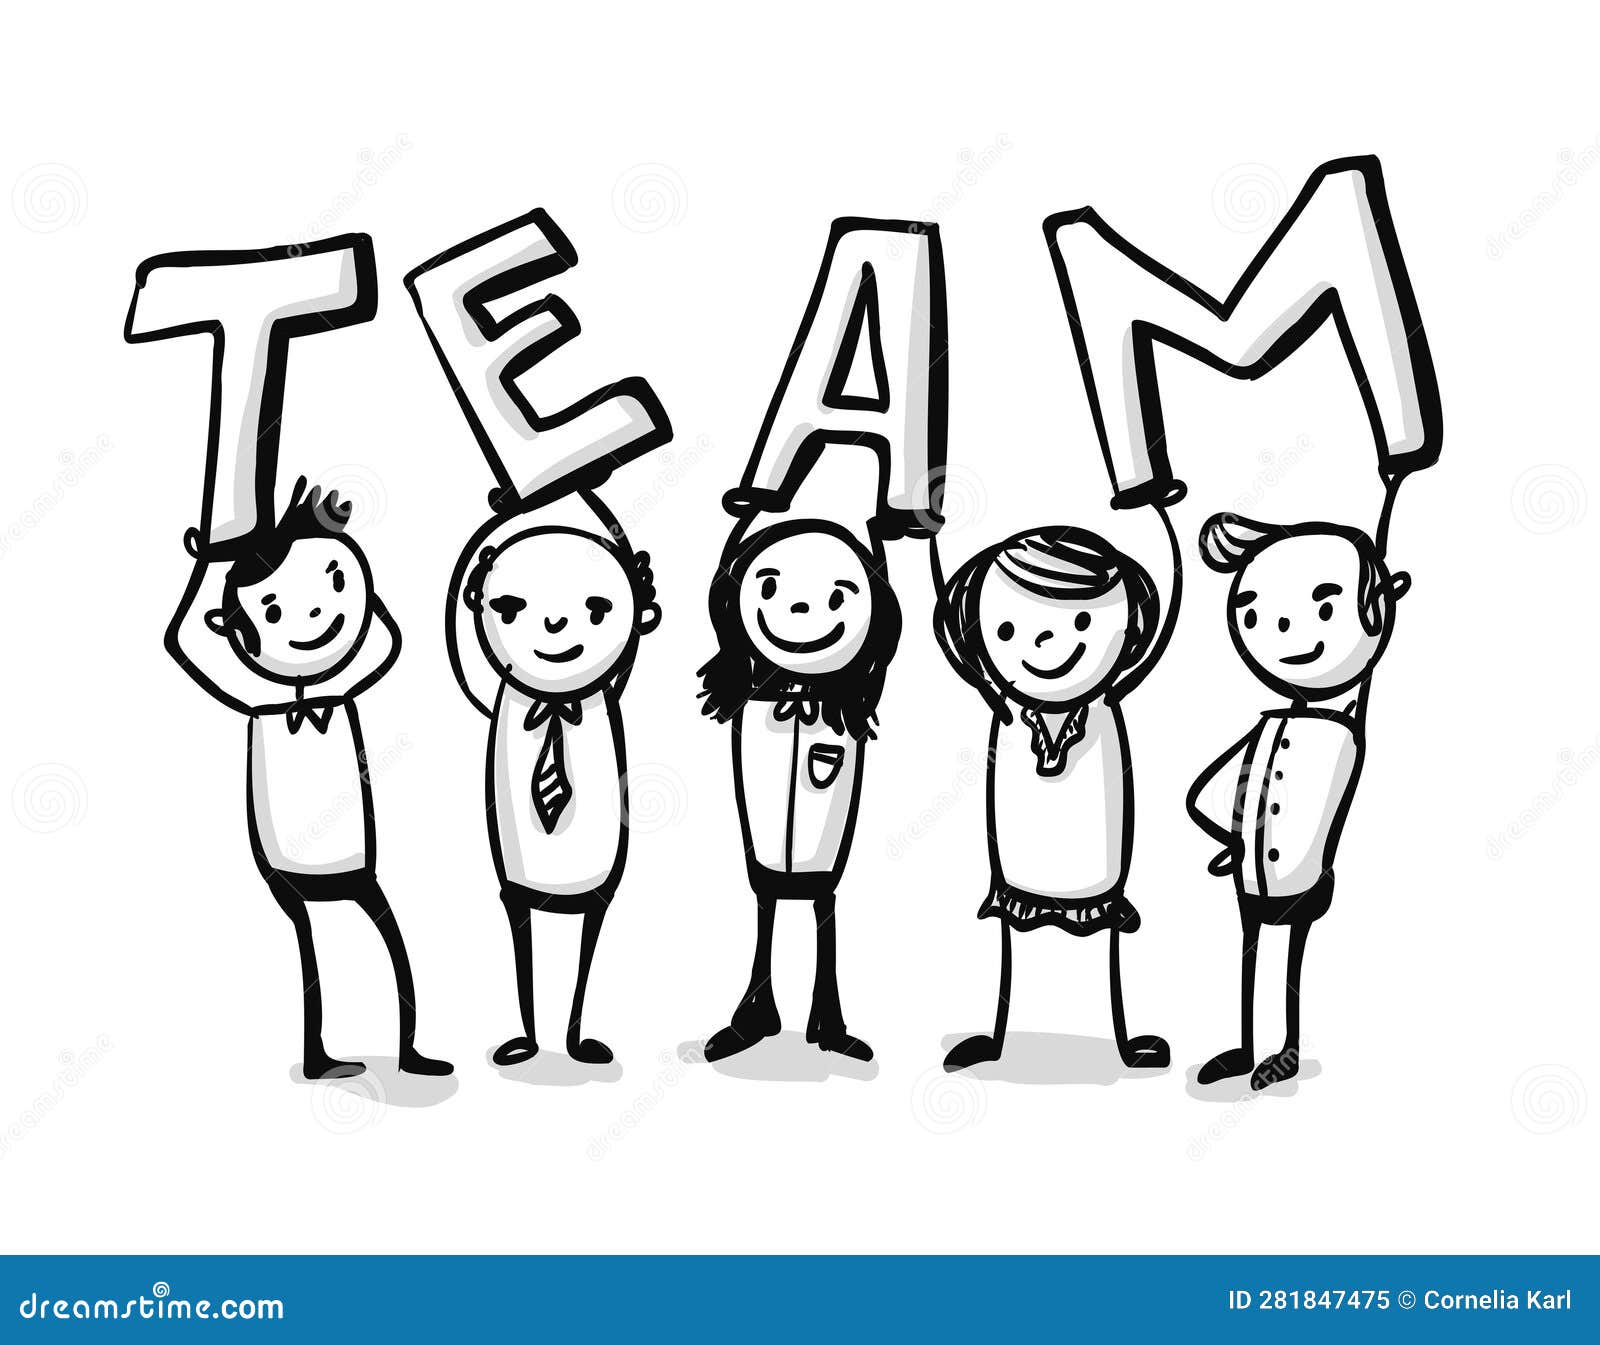 Team of Men and Women Holding Up TEAM Characters - Doodle - Digital ...